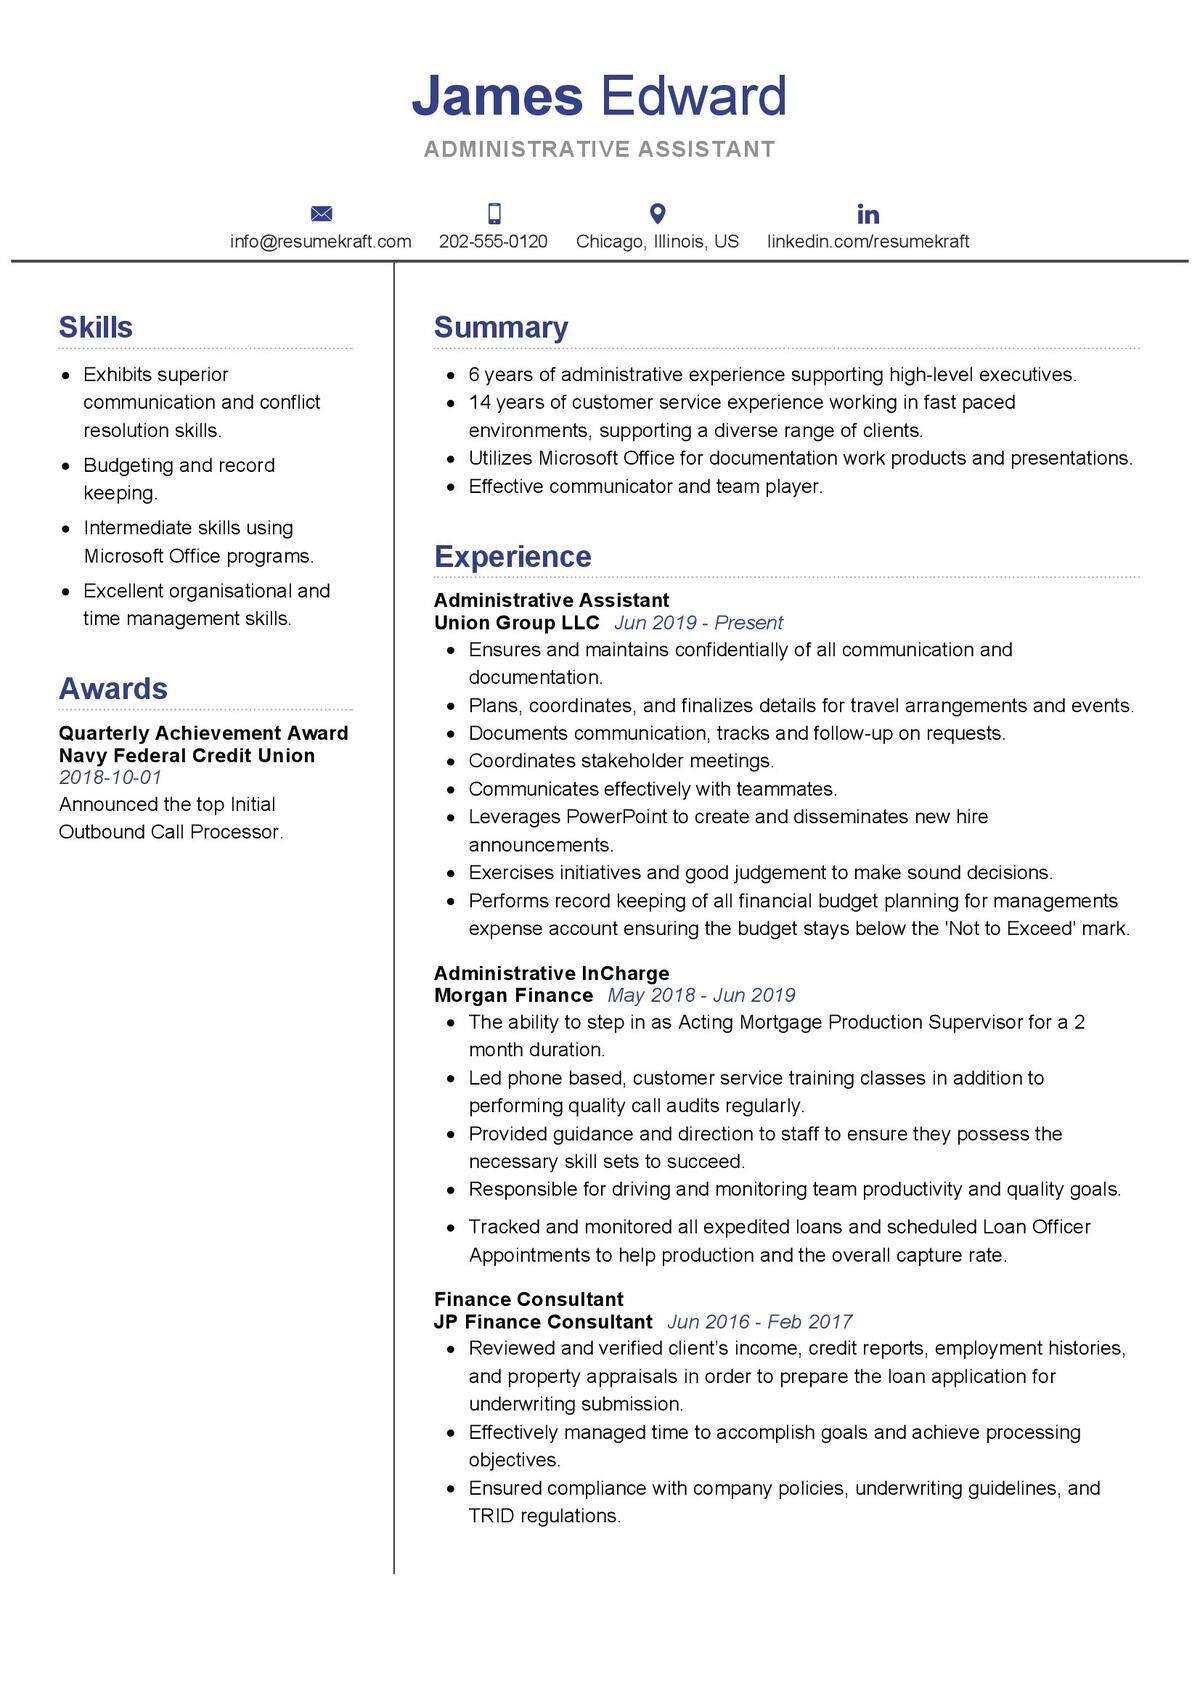 Sample Government Resume for Administrative Specialist Administrative assistant Resume Sample 2021 Writing Guide …